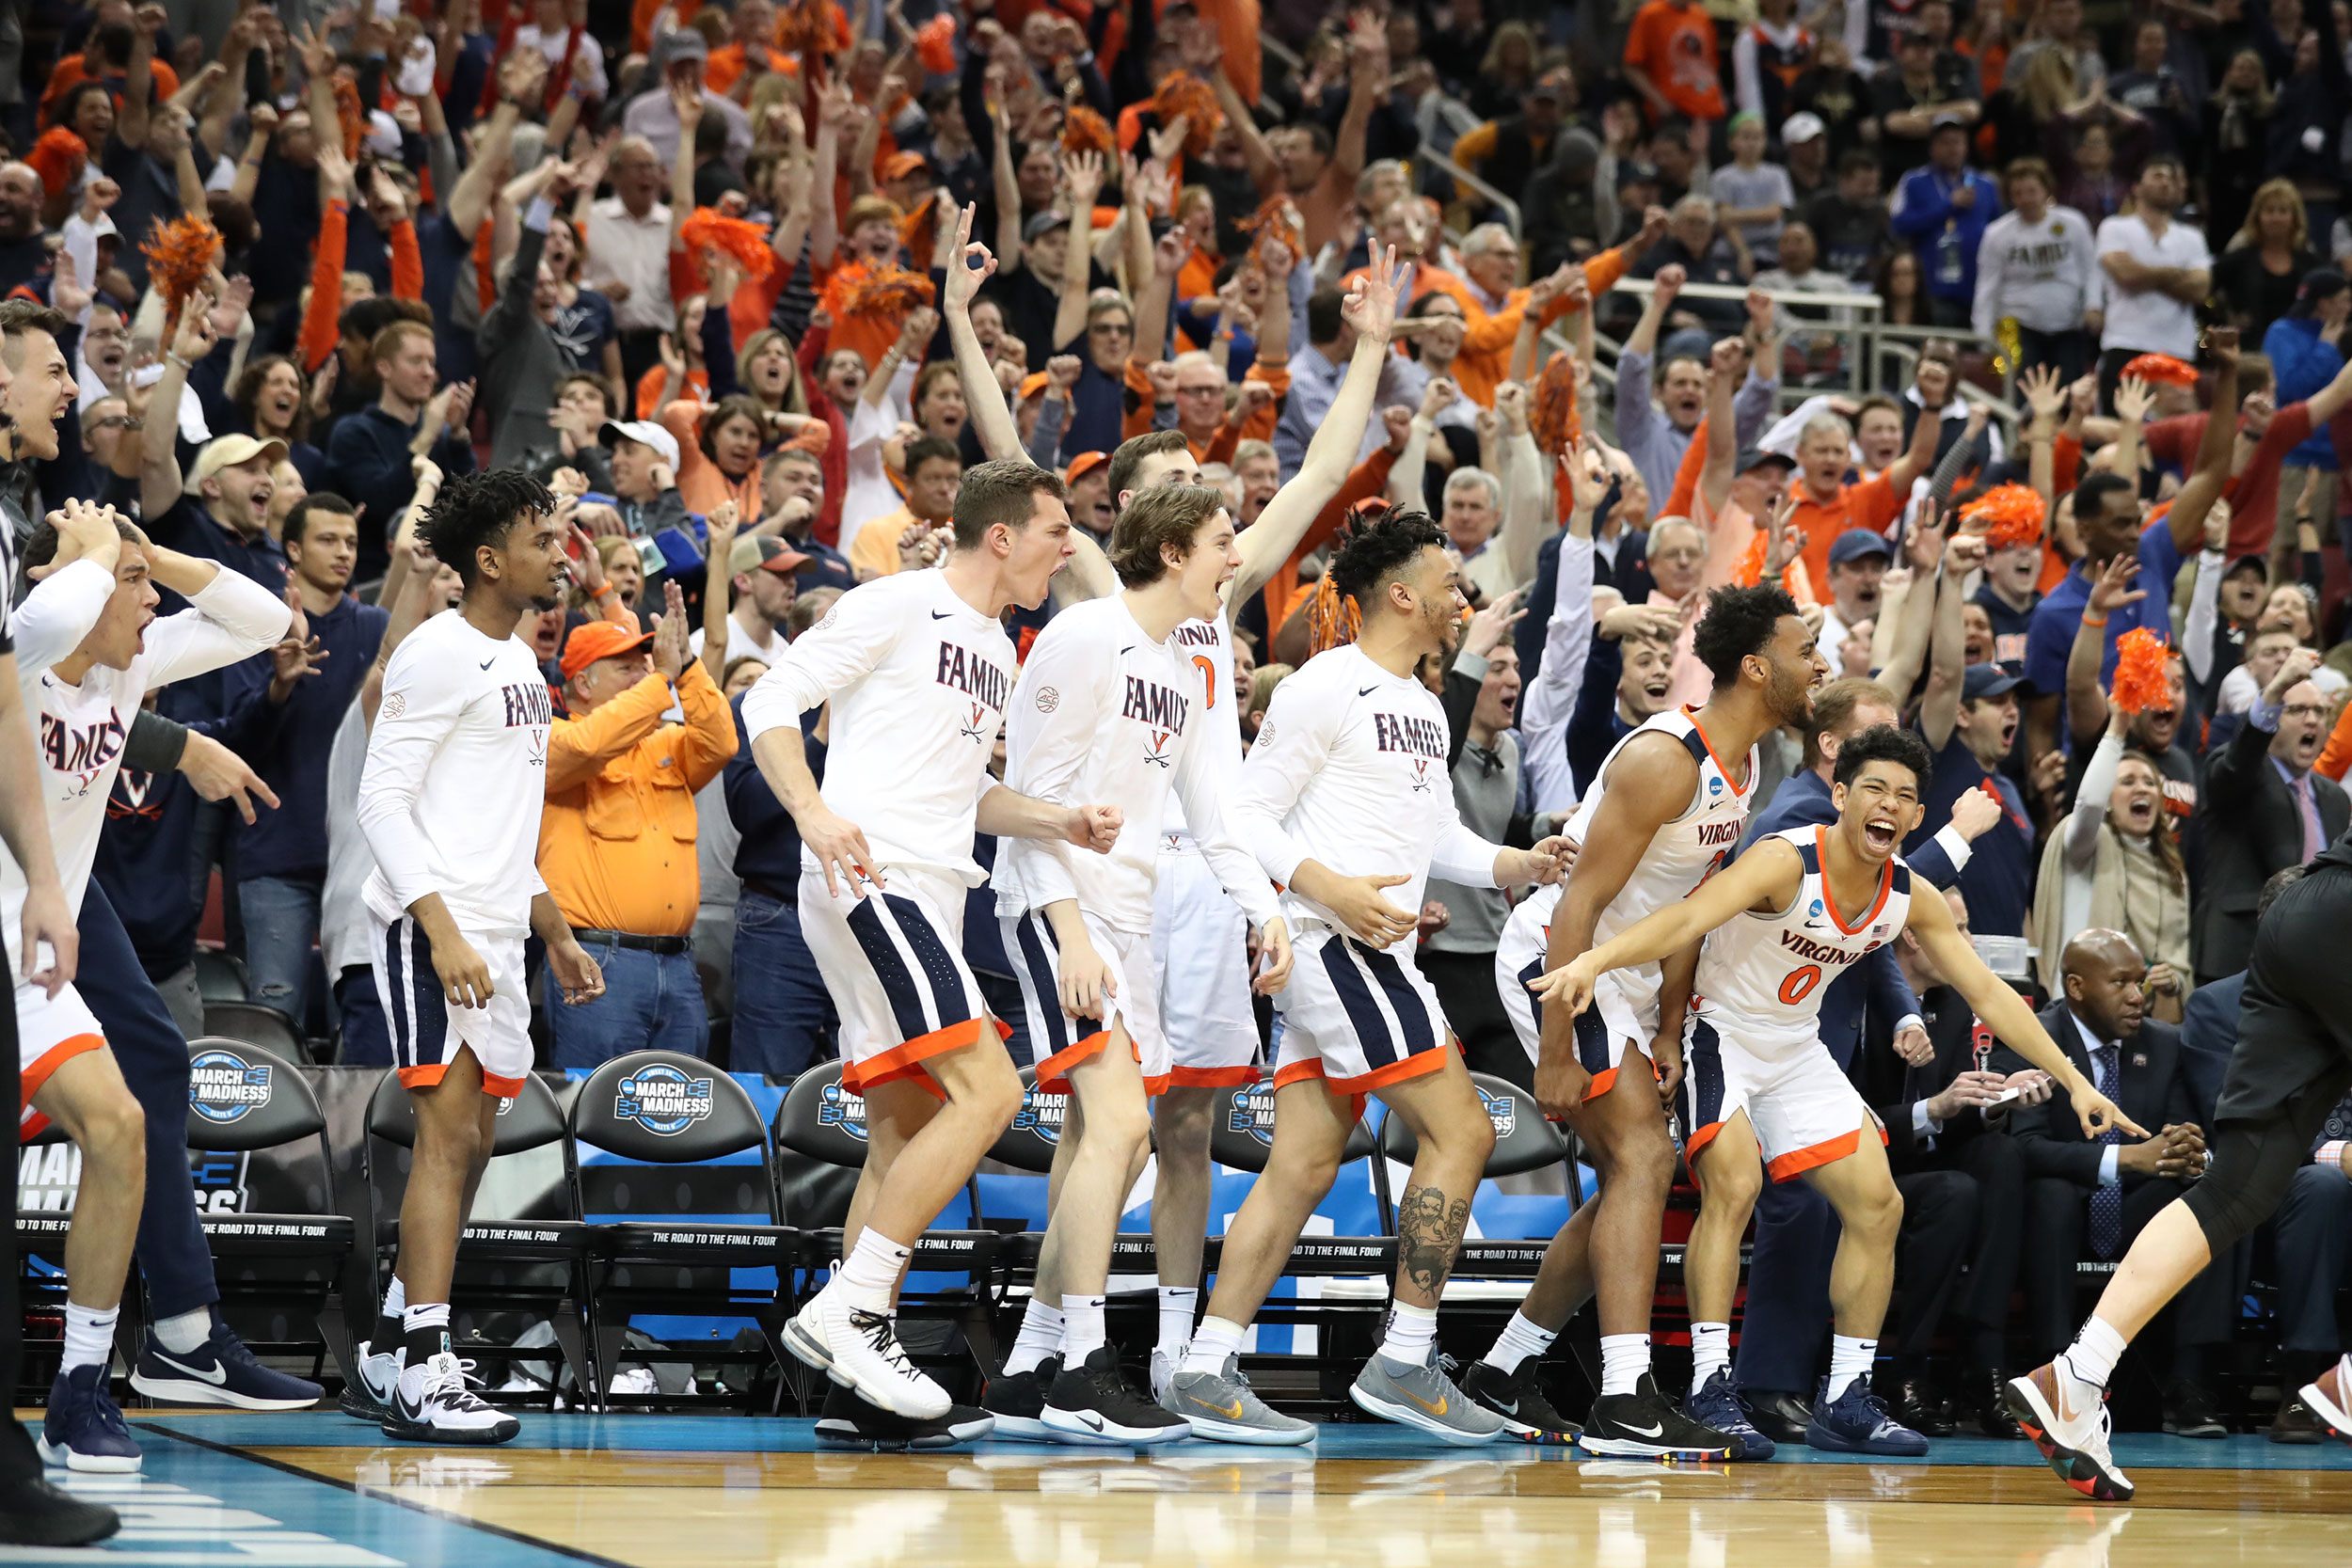 UVA basketball team erupting in celebration on the side of the court 